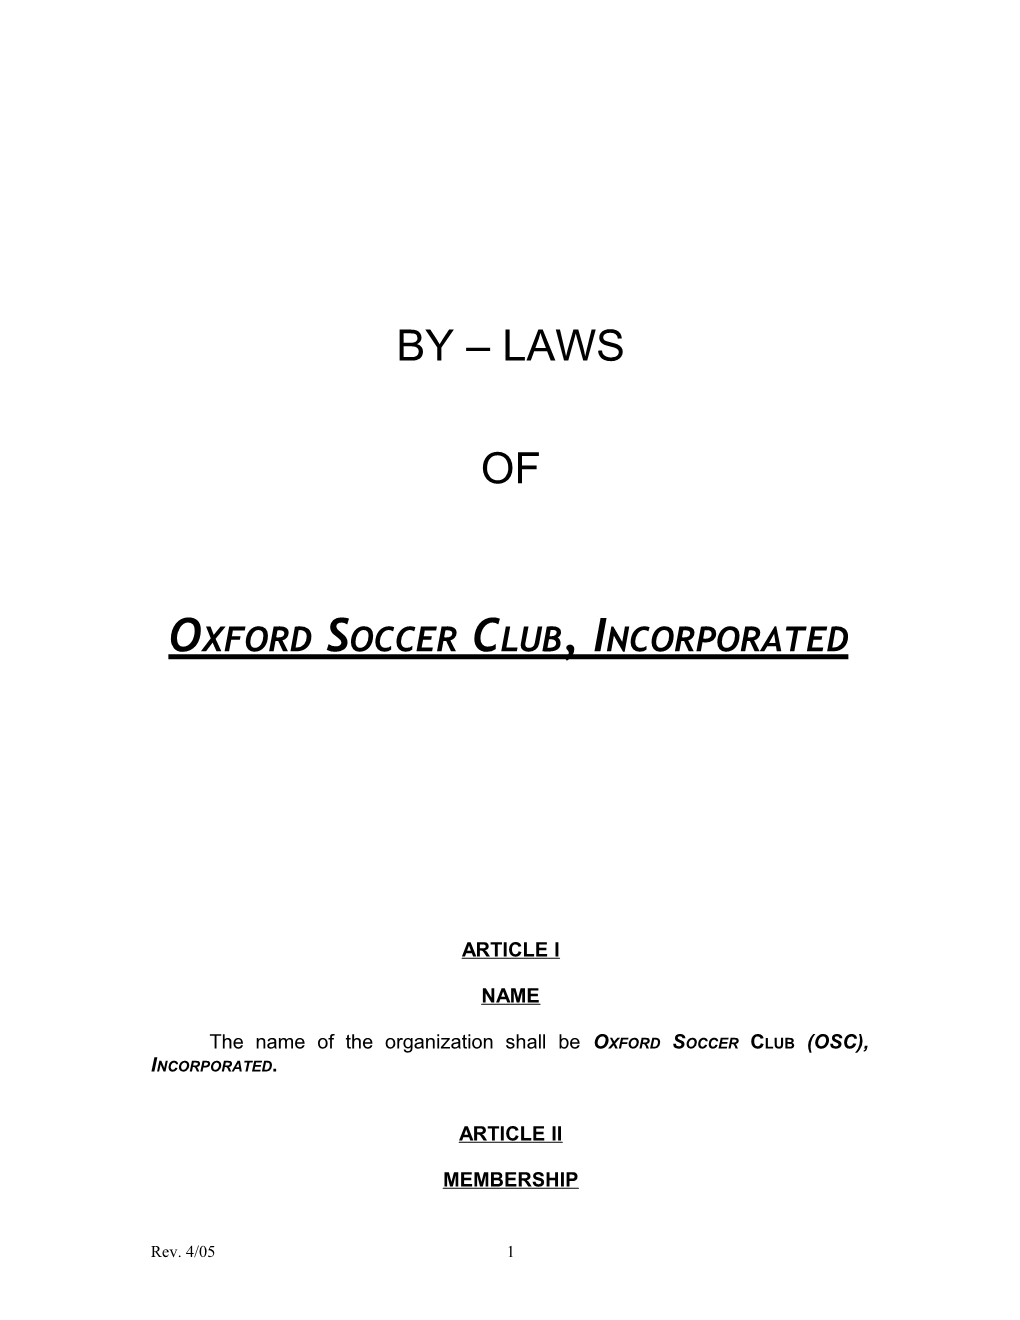 Oxford Soccer Club, Incorporated